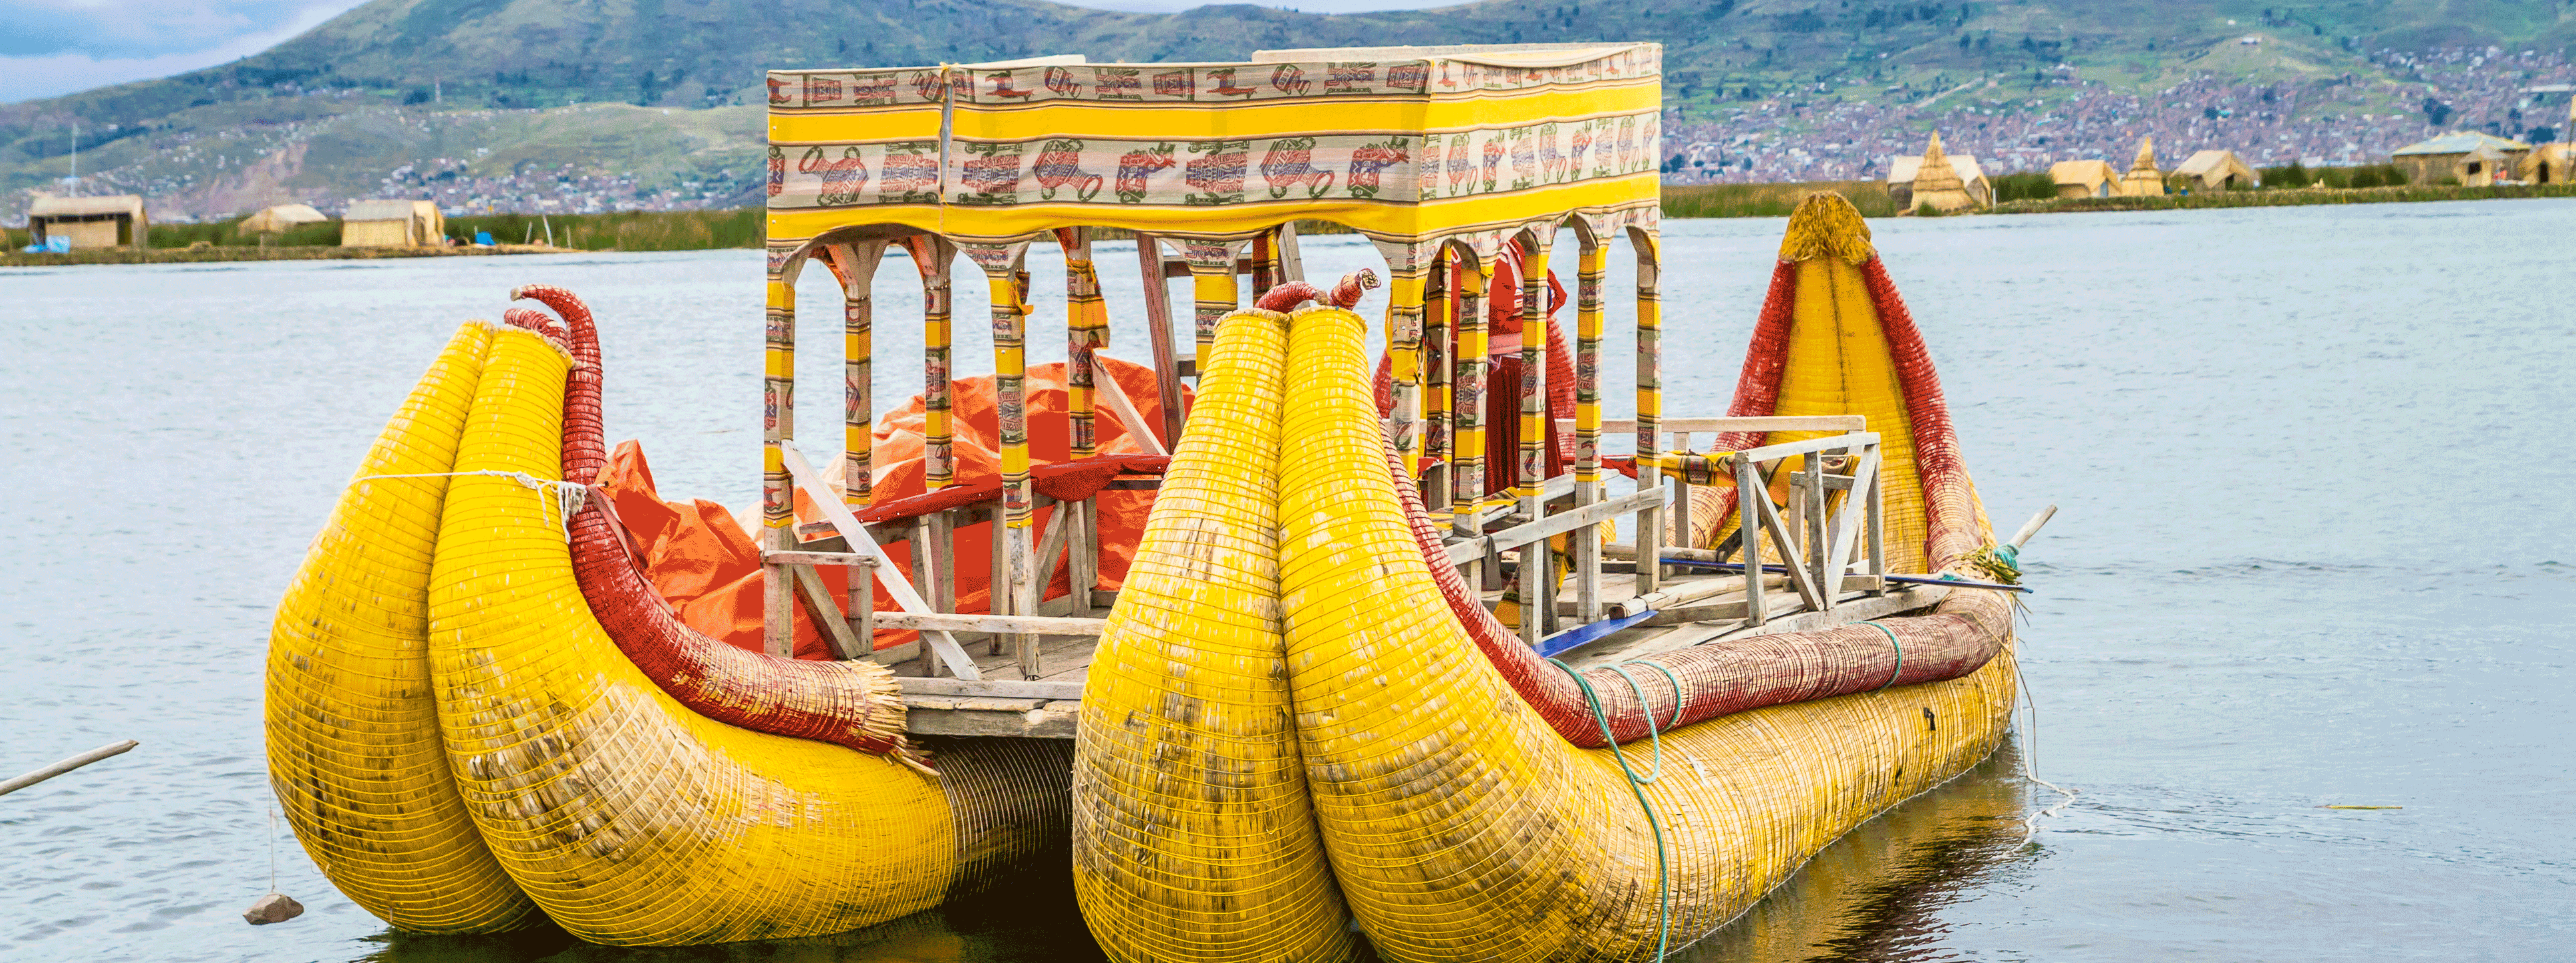 /resource/Images/southamerica/peru/headerimage/Traditional-boats-in-the-floating-and-tourist-Islands-of-lake-Titicaca-Puno-Peru-South-America.png